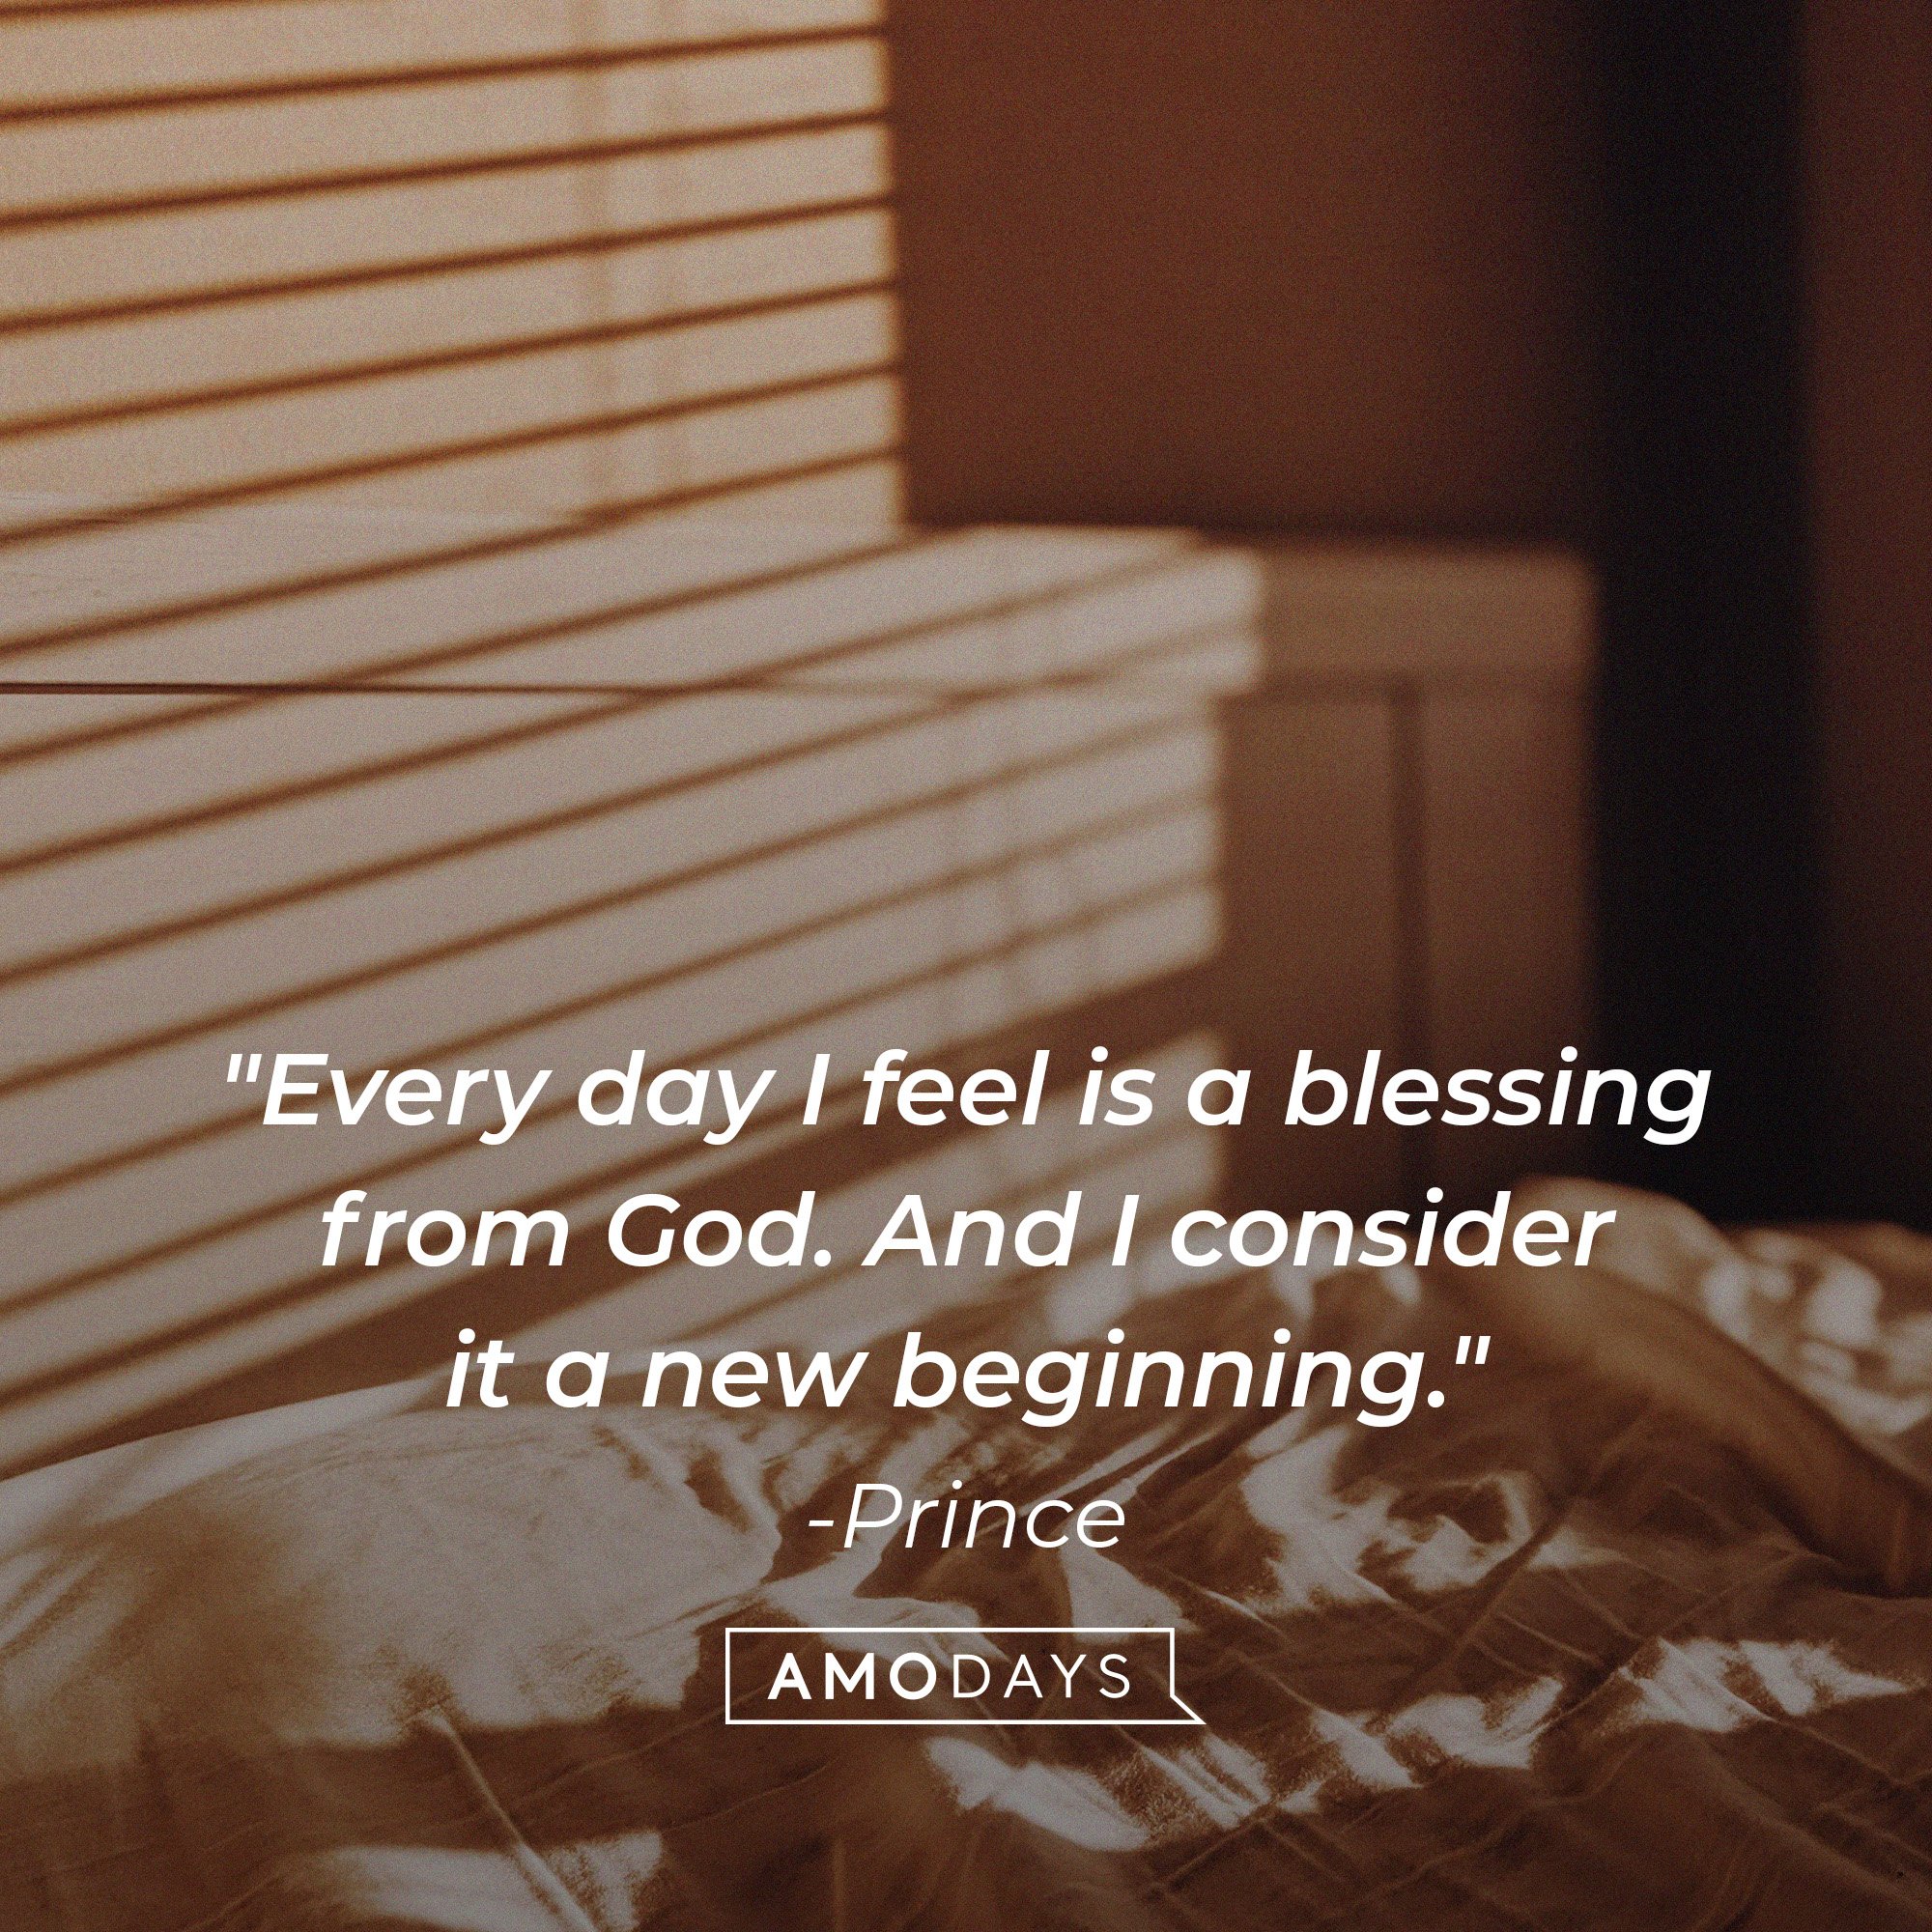 Prince's quote; ry day I feel is a blessing from God. And I consider it a new beginning." | Image: AmoDays 